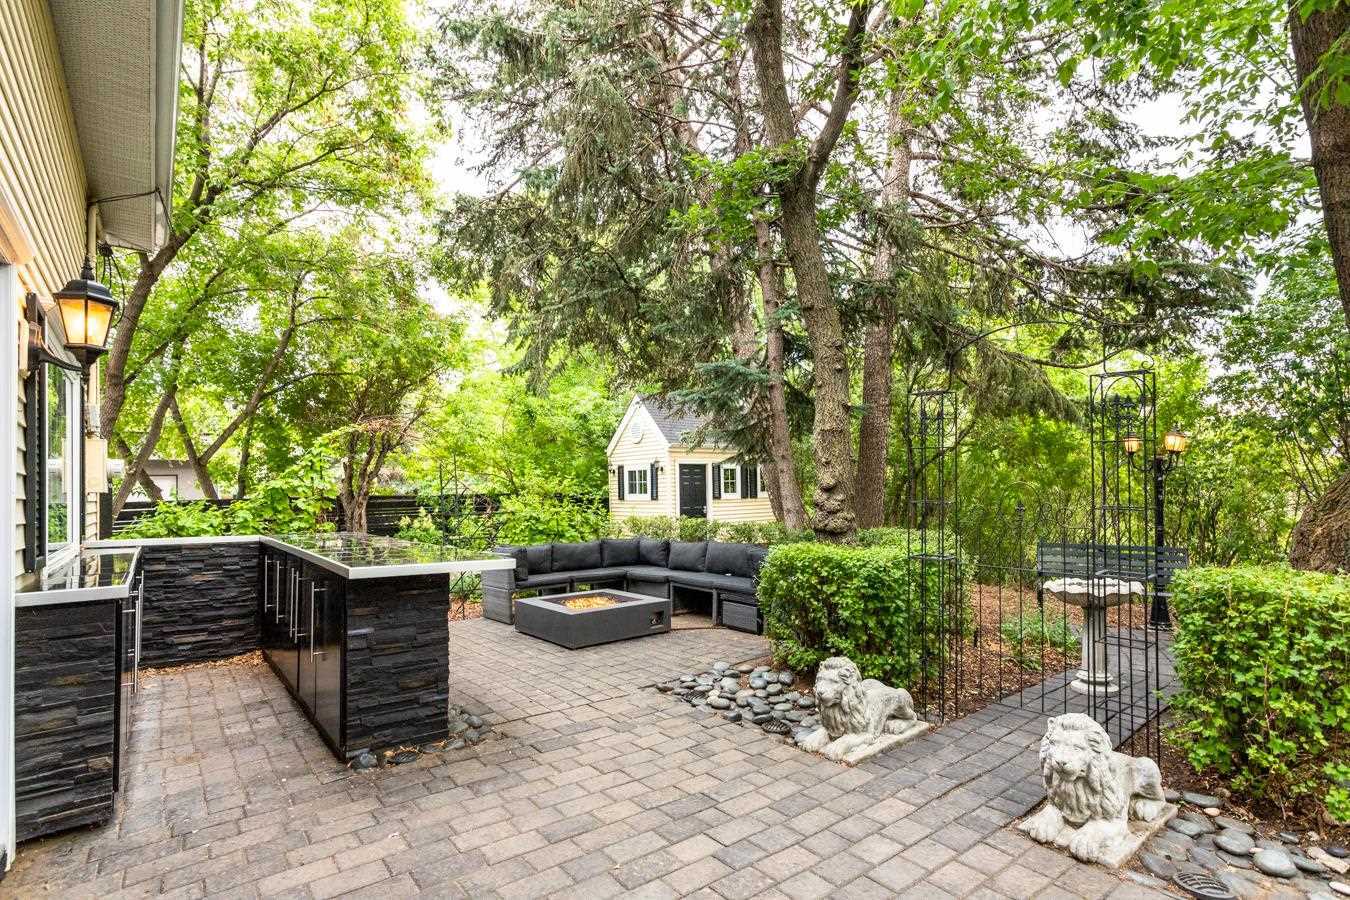 Backyard ground floor patio made of grey stone; wrought iron gate to right, black stone outdoor kitchen to left, black sectional patio couch with square fire pit in middle; shed that looks like a tiny guest house in background